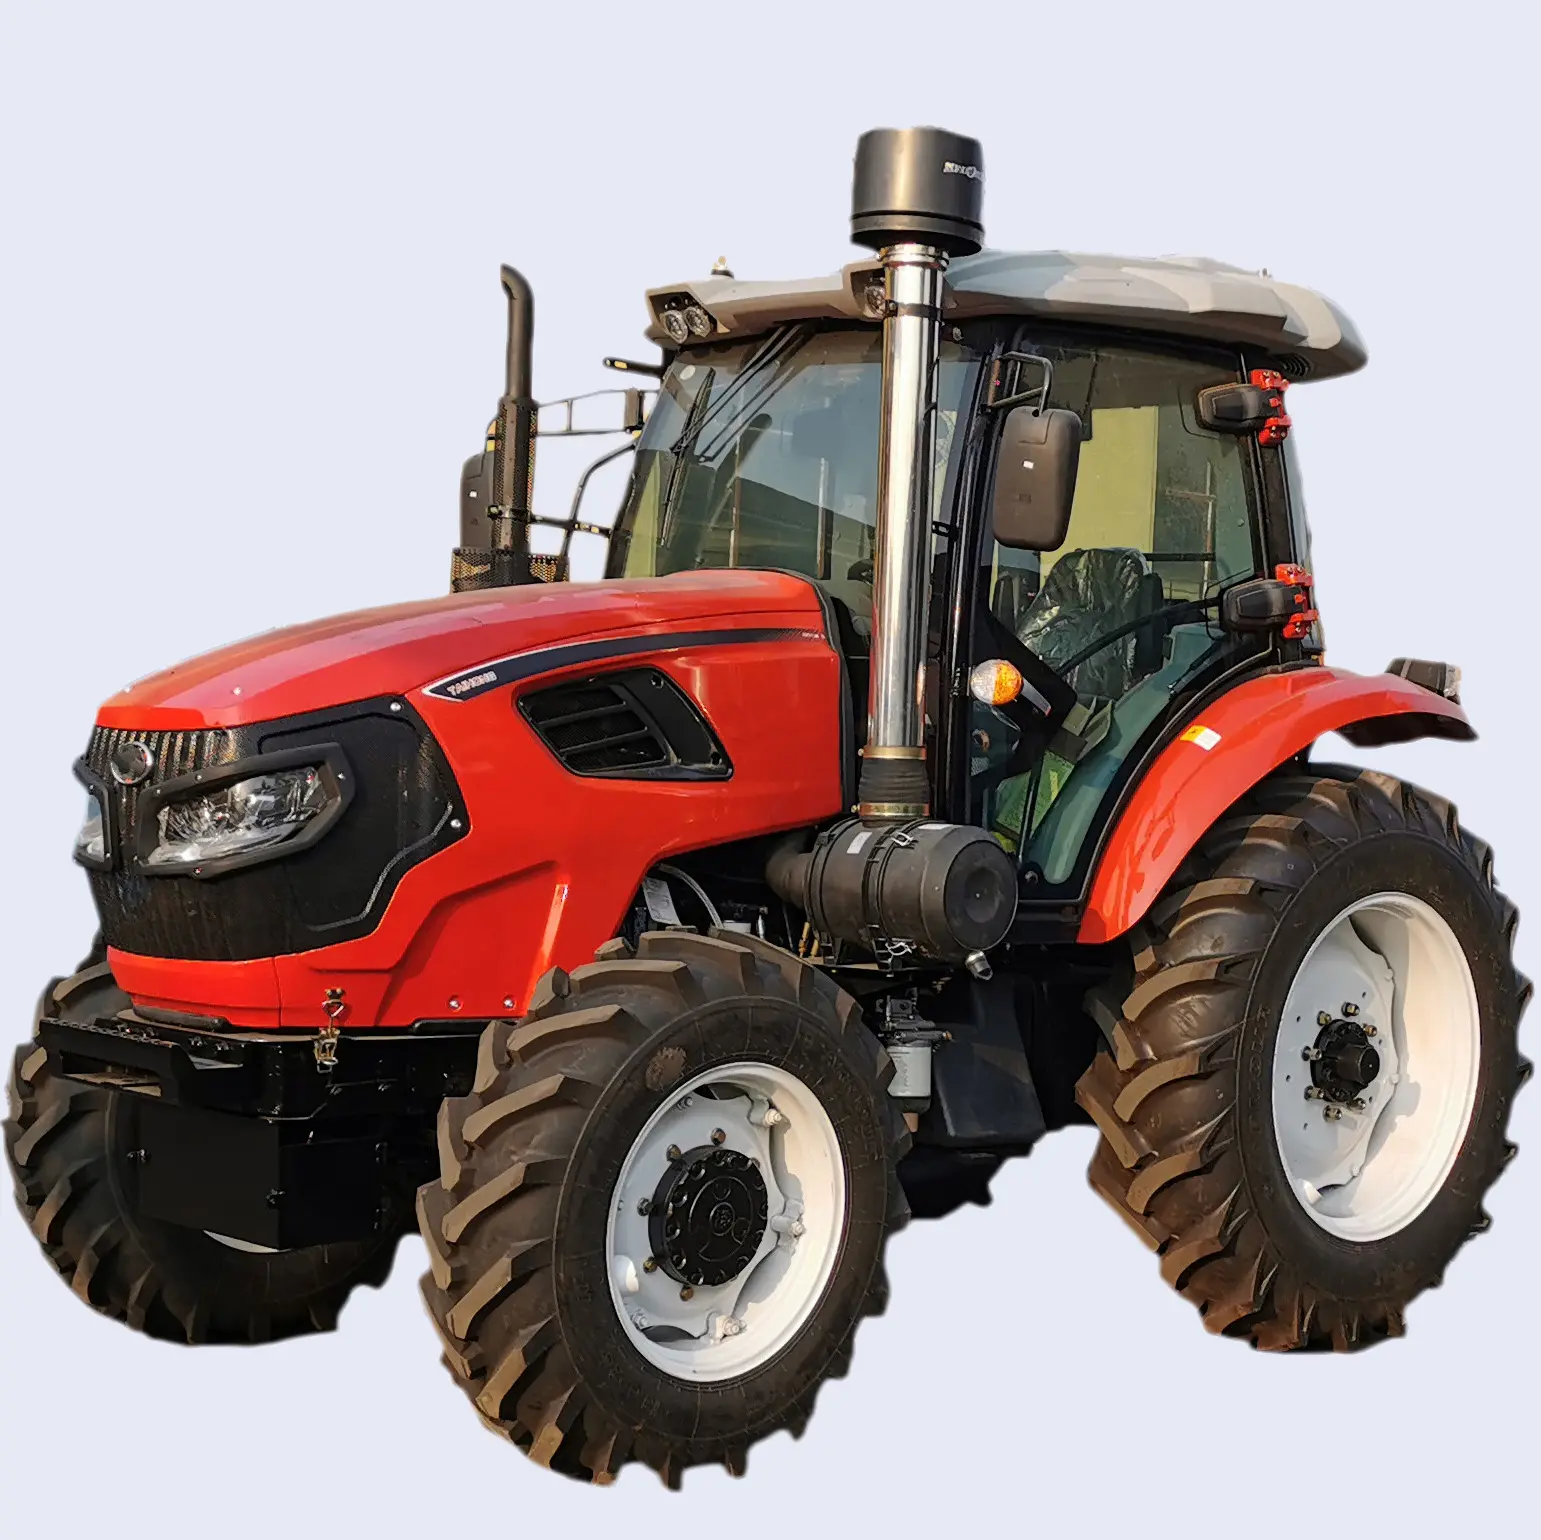 ORIGINAL USED AND NEW CASE IH JX55 TRACTOR FOR SALE/ CASE IH TRACTORS FOR SALE